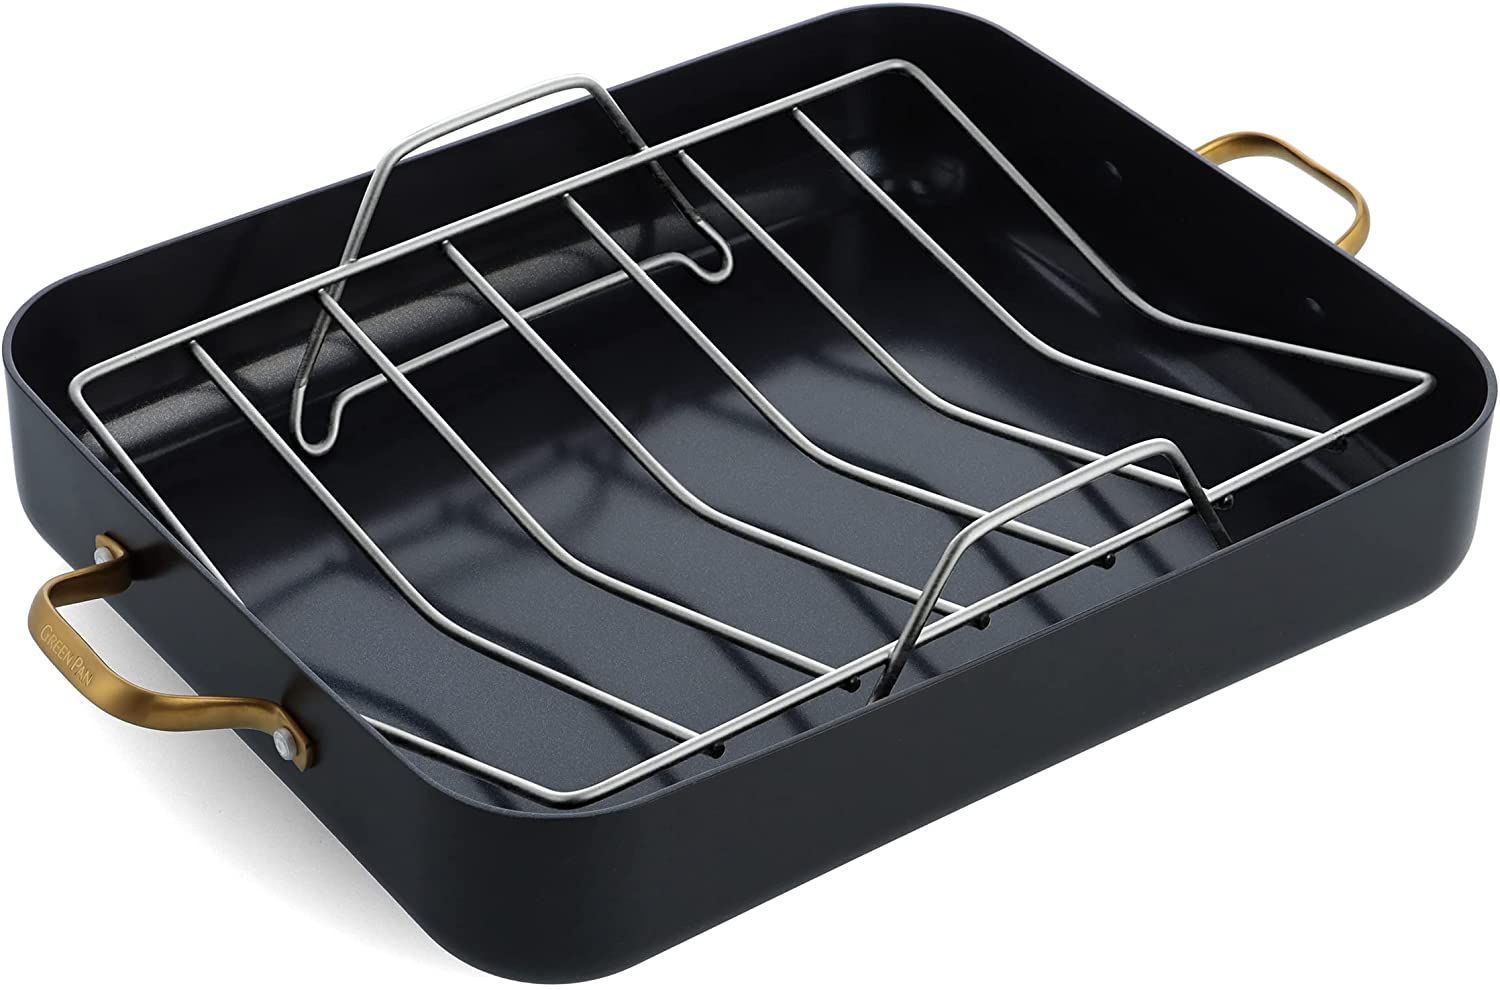 GreenPan Reserve Healthy Ceramic Nonstick Roasting Pan with v-shaped wire rack inside and gold handles